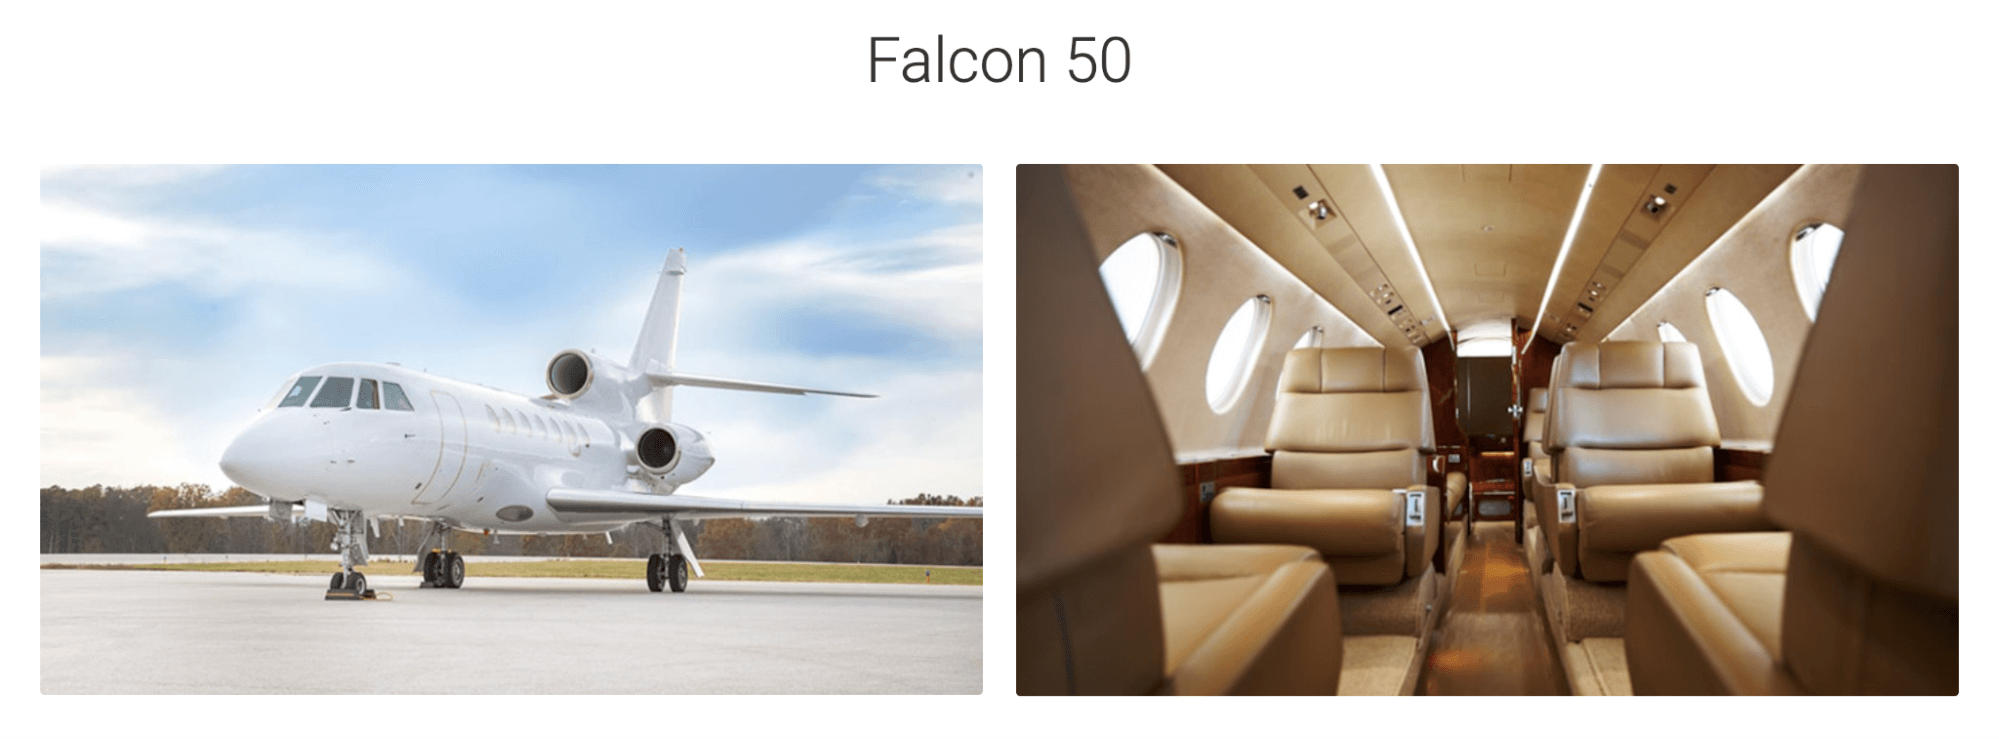 The picture shows the interior and exterior of Falcon 50 jets available from JetOptions.